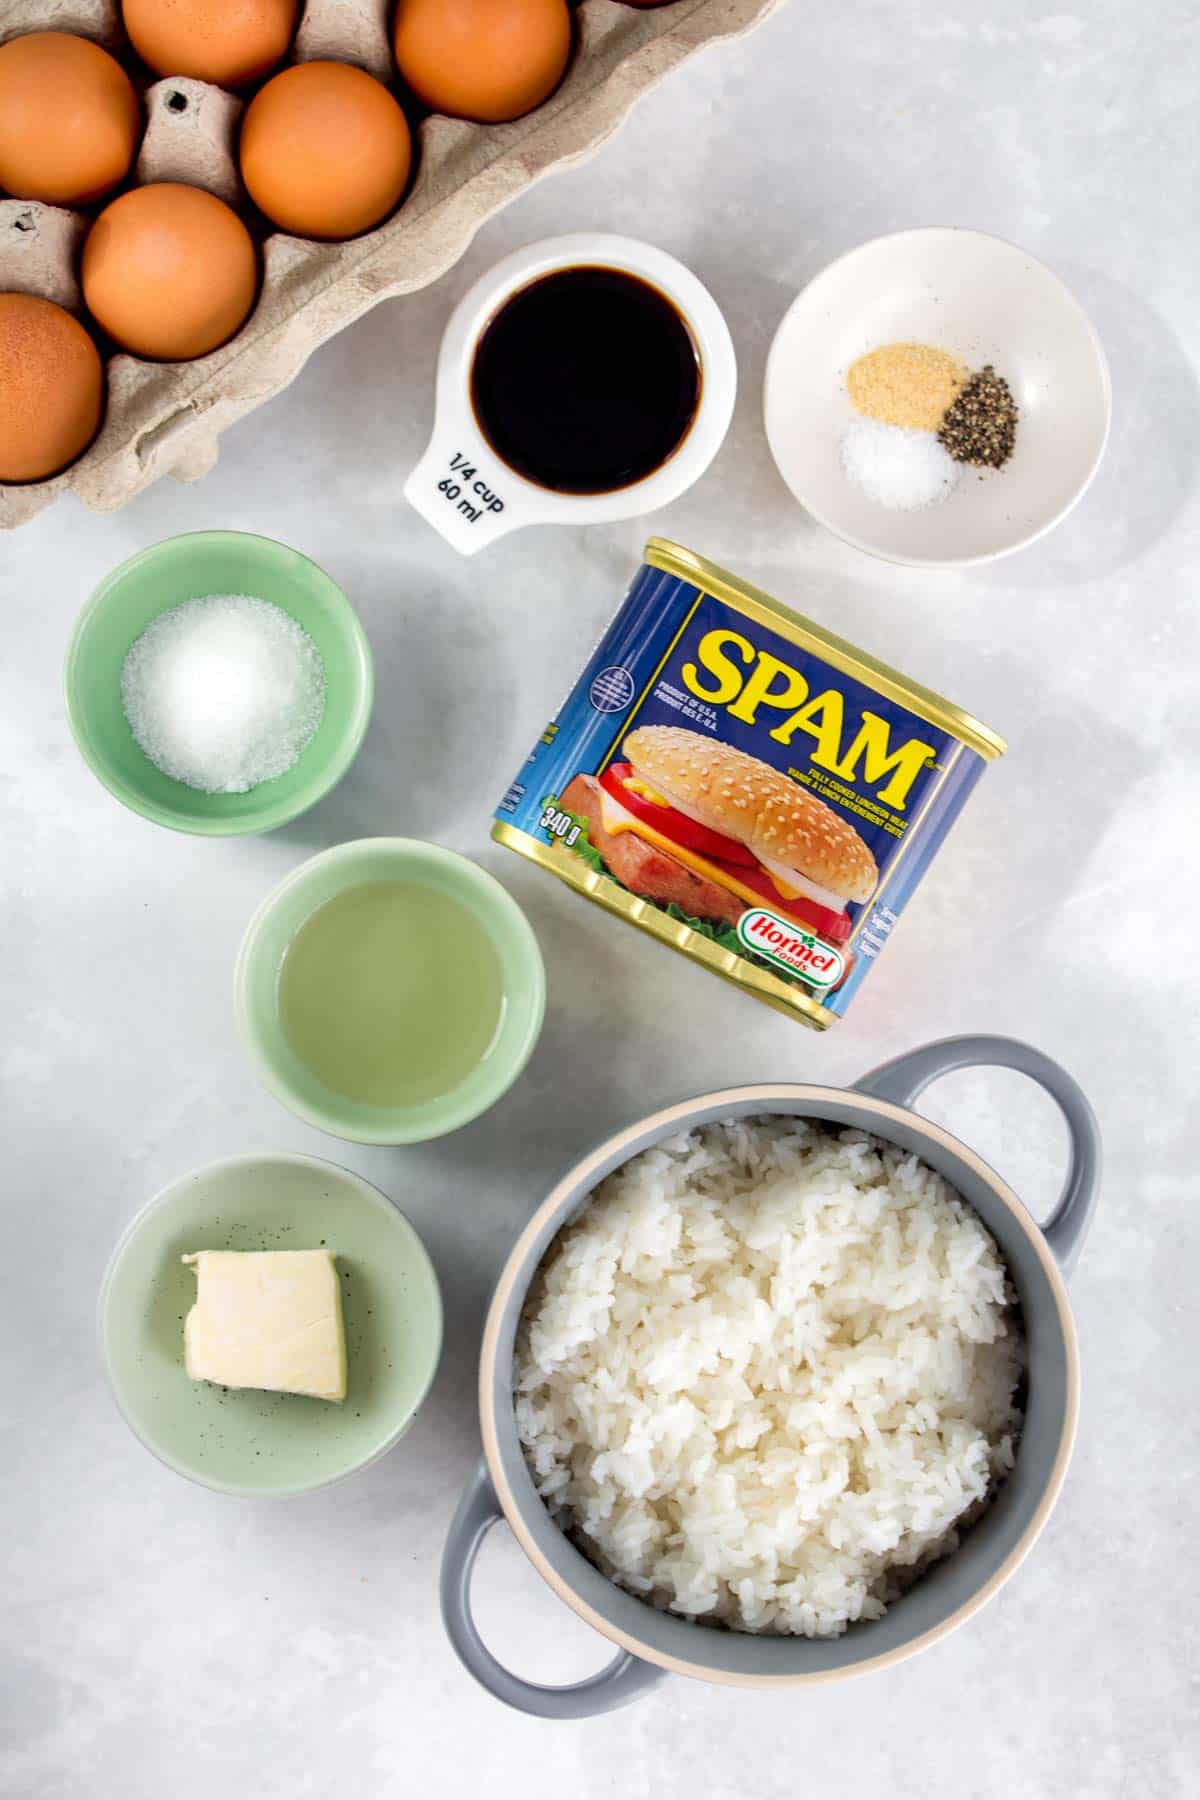 Ingredients for spam, eggs, and rice recipe.